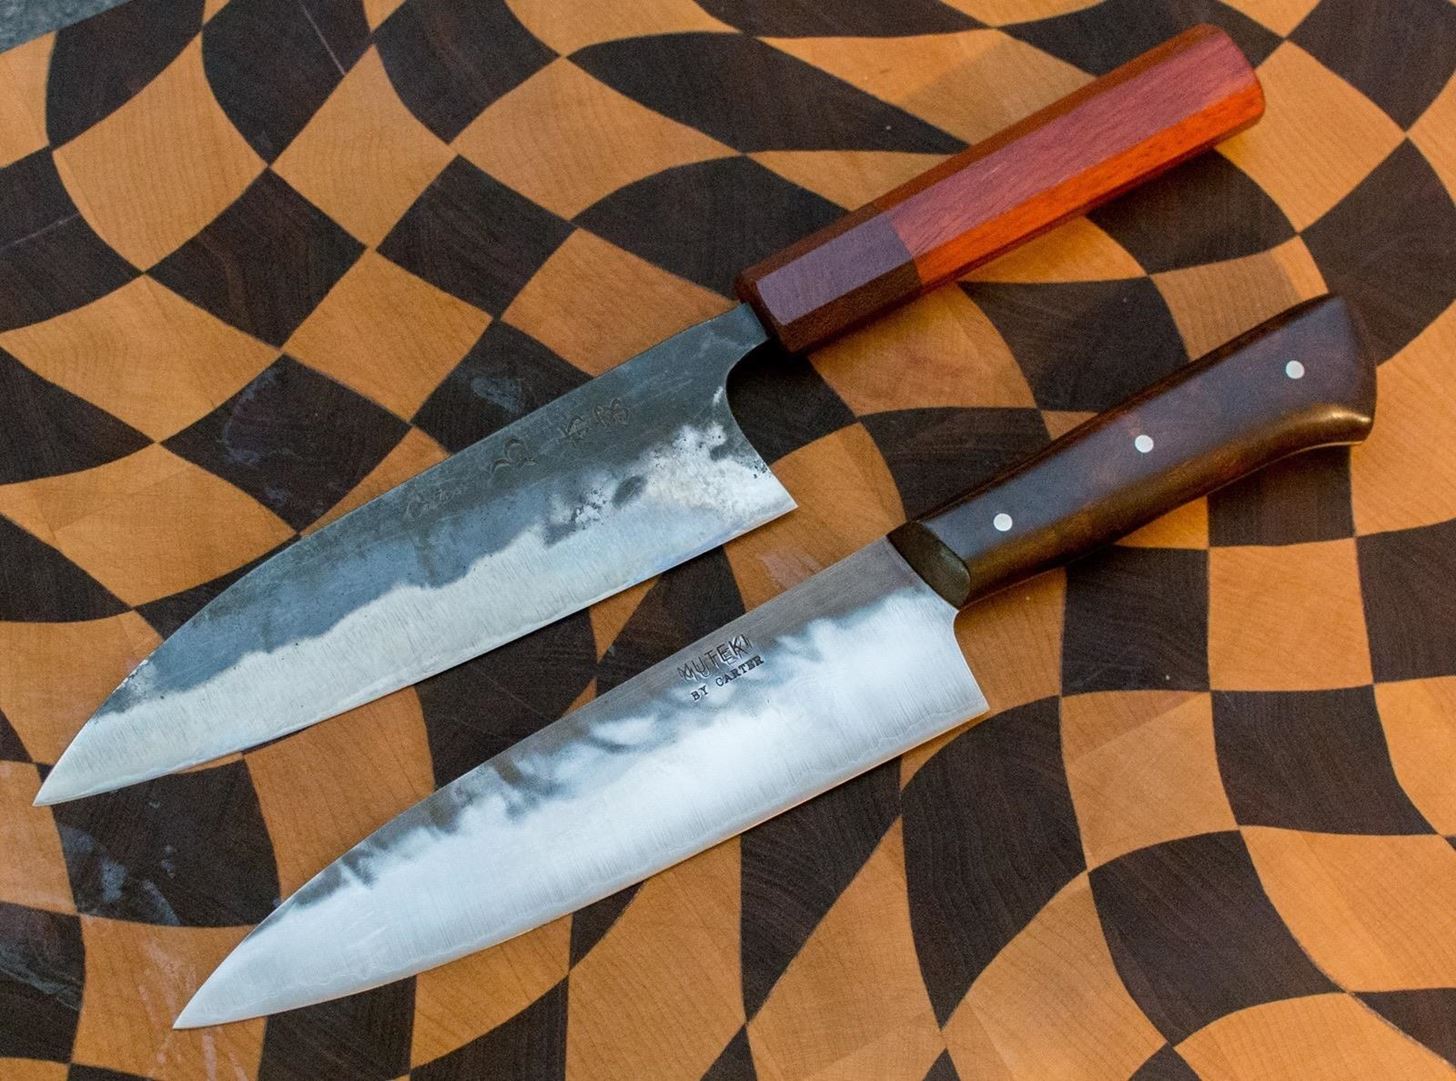 https://img.wonderhowto.com/img/63/58/63555799345360/0/food-tool-friday-why-pros-use-carbon-steel-knives.w1456.jpg